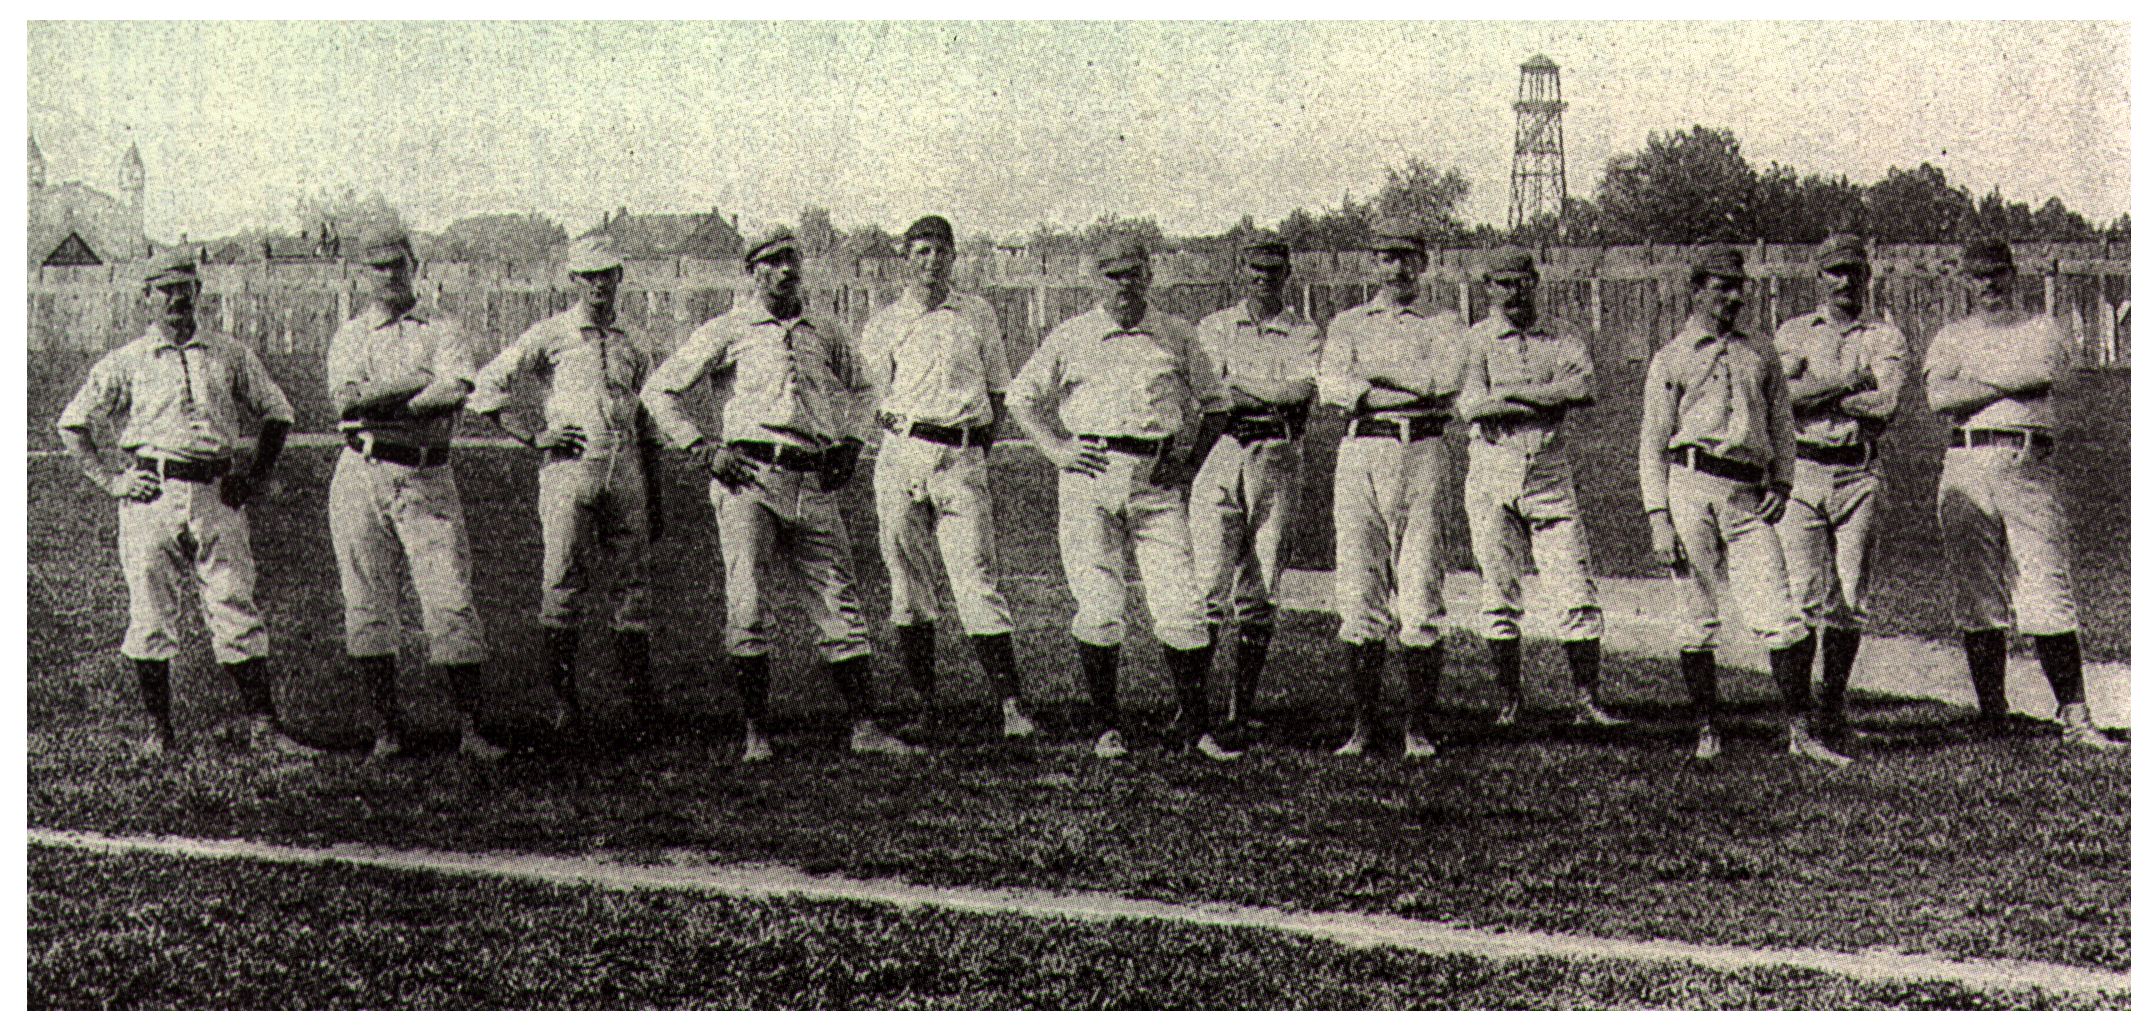 File:1885 St. Louis Brown Stockings with Sportsman's Park in